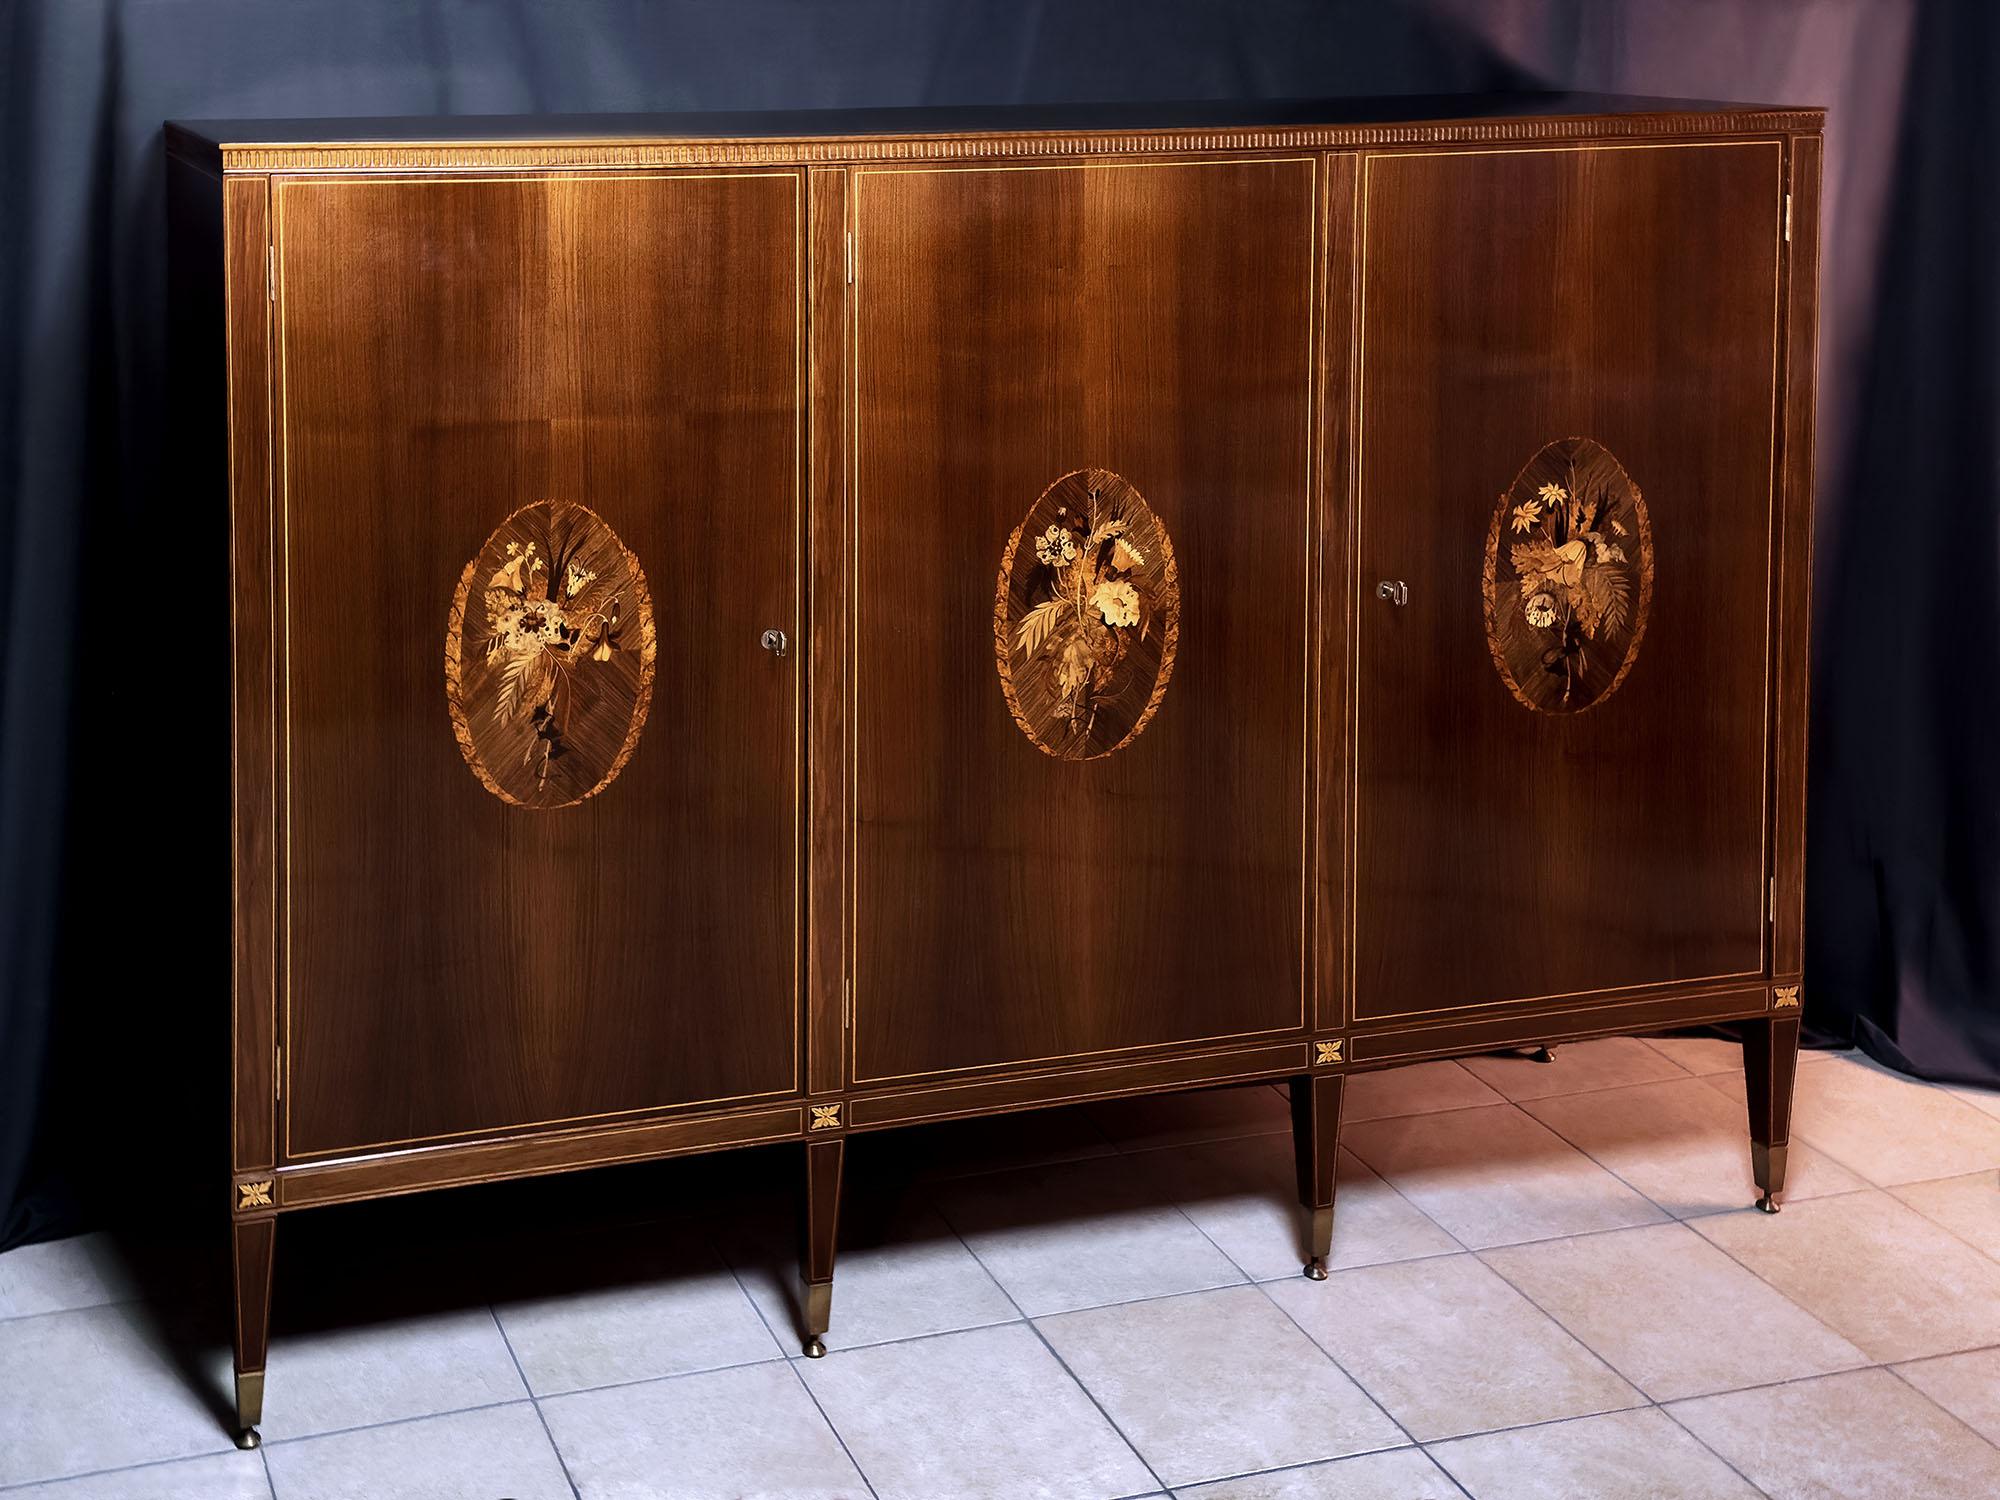 Mid-Century Modern Italian Mid-Century Sideboard with Inlays by Anzani for Marelli & Colico, 1950s For Sale